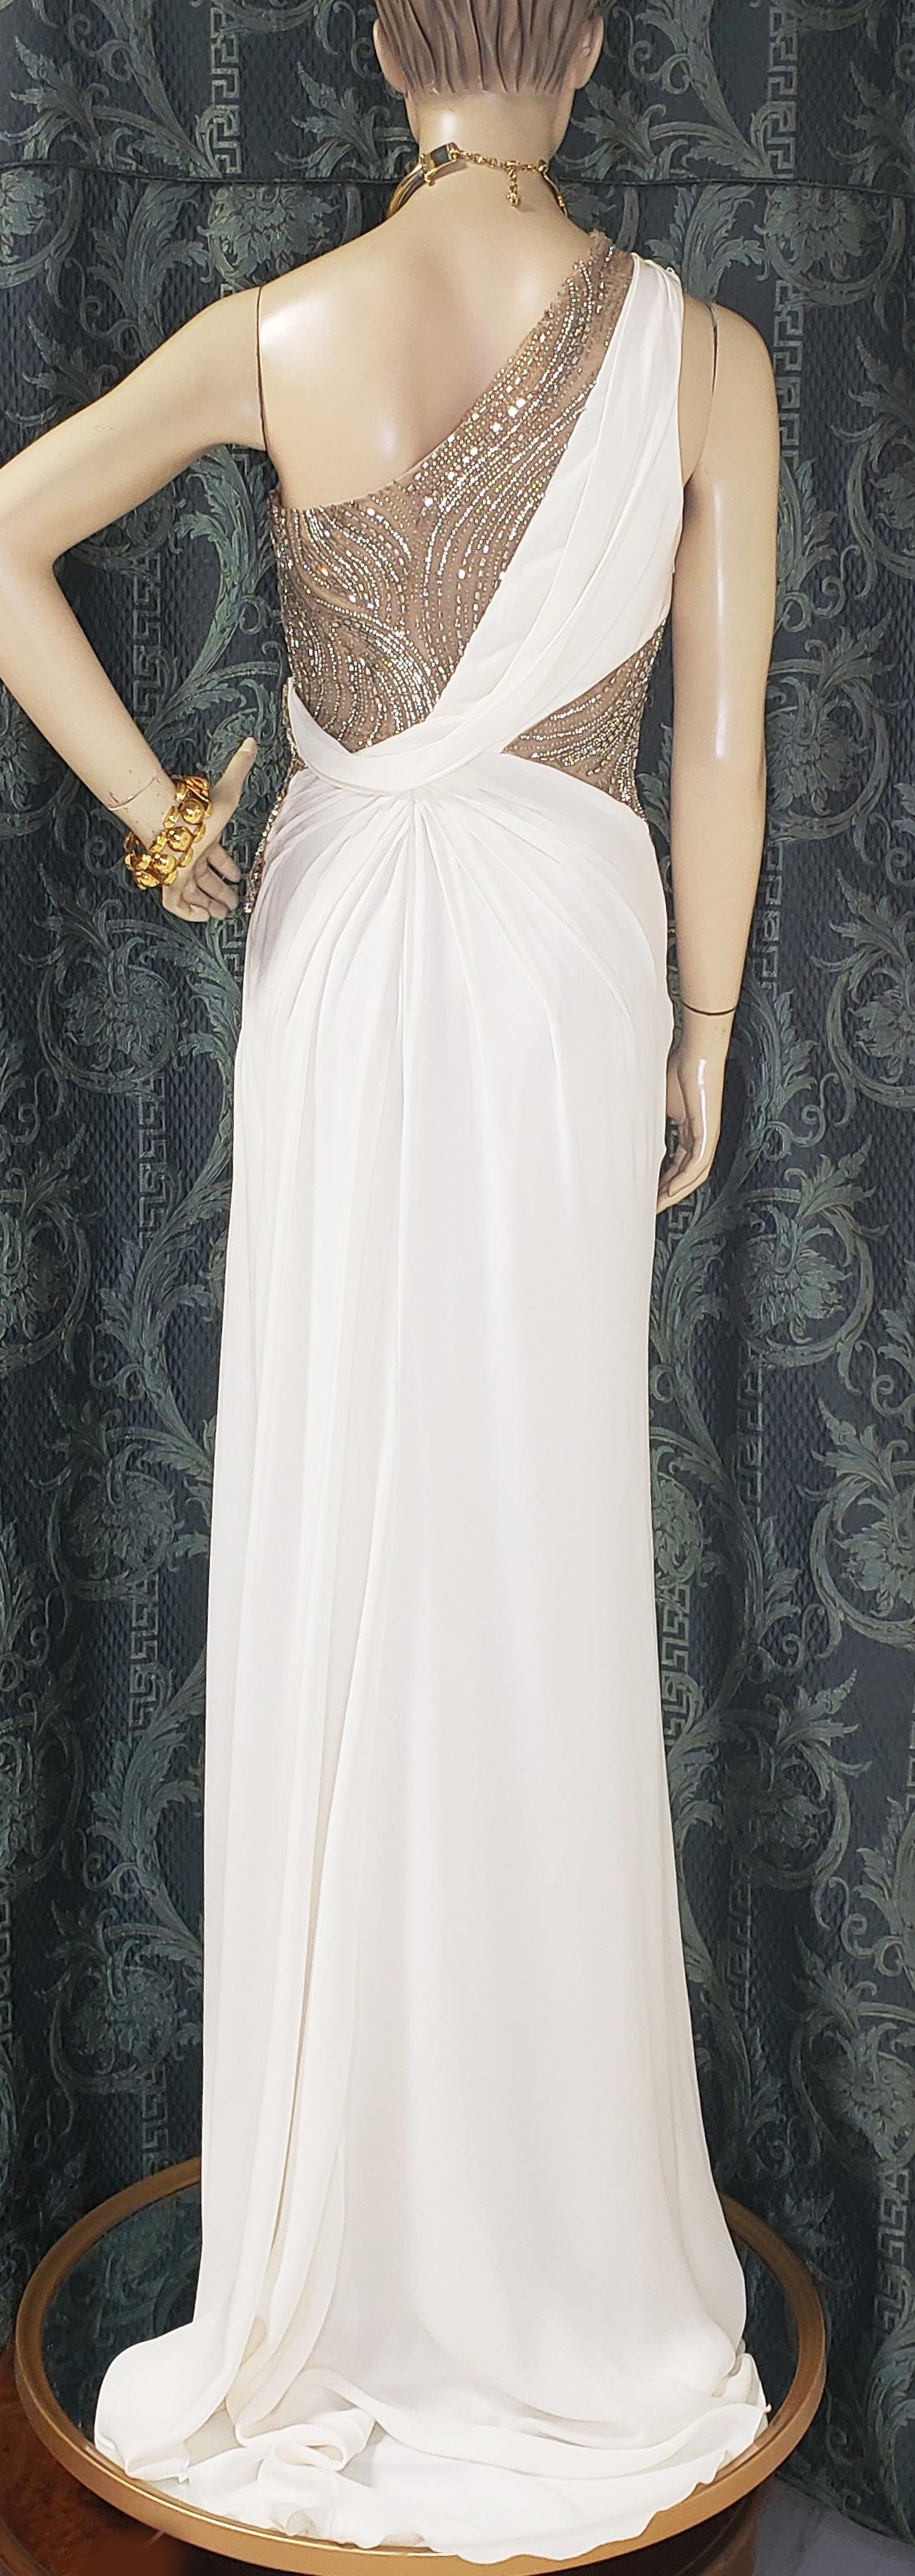 VERSACE CRYSTAL EMBELLISHED WHITE SILK GOWN DRESS Sz IT 42 2